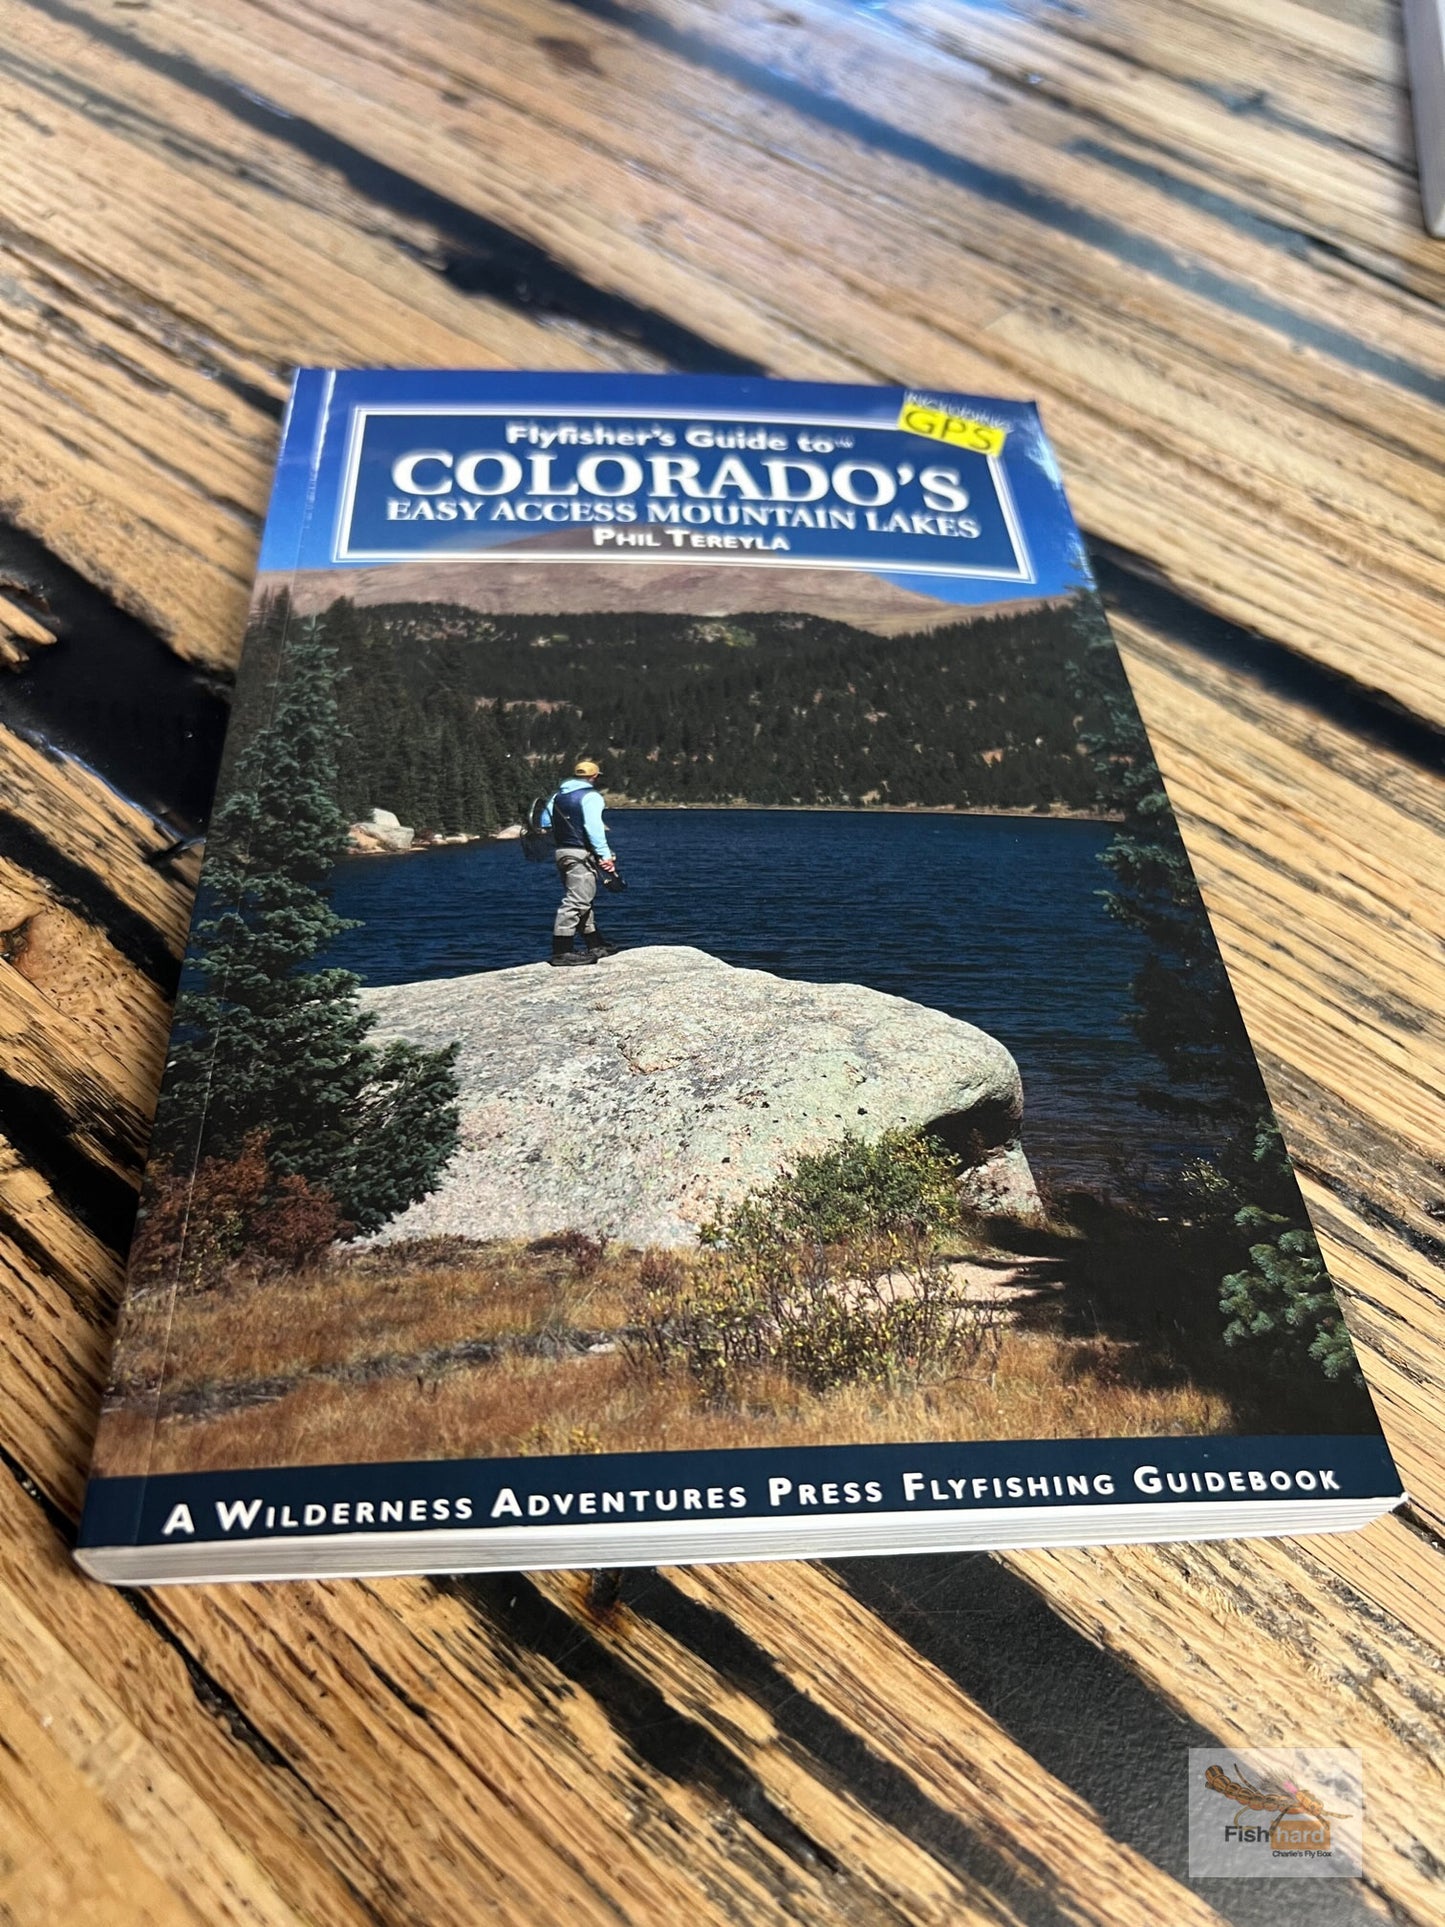 Fly Fisher's Guide to Colorado's Easy Access Mountain Lakes, by Phil Tereyla